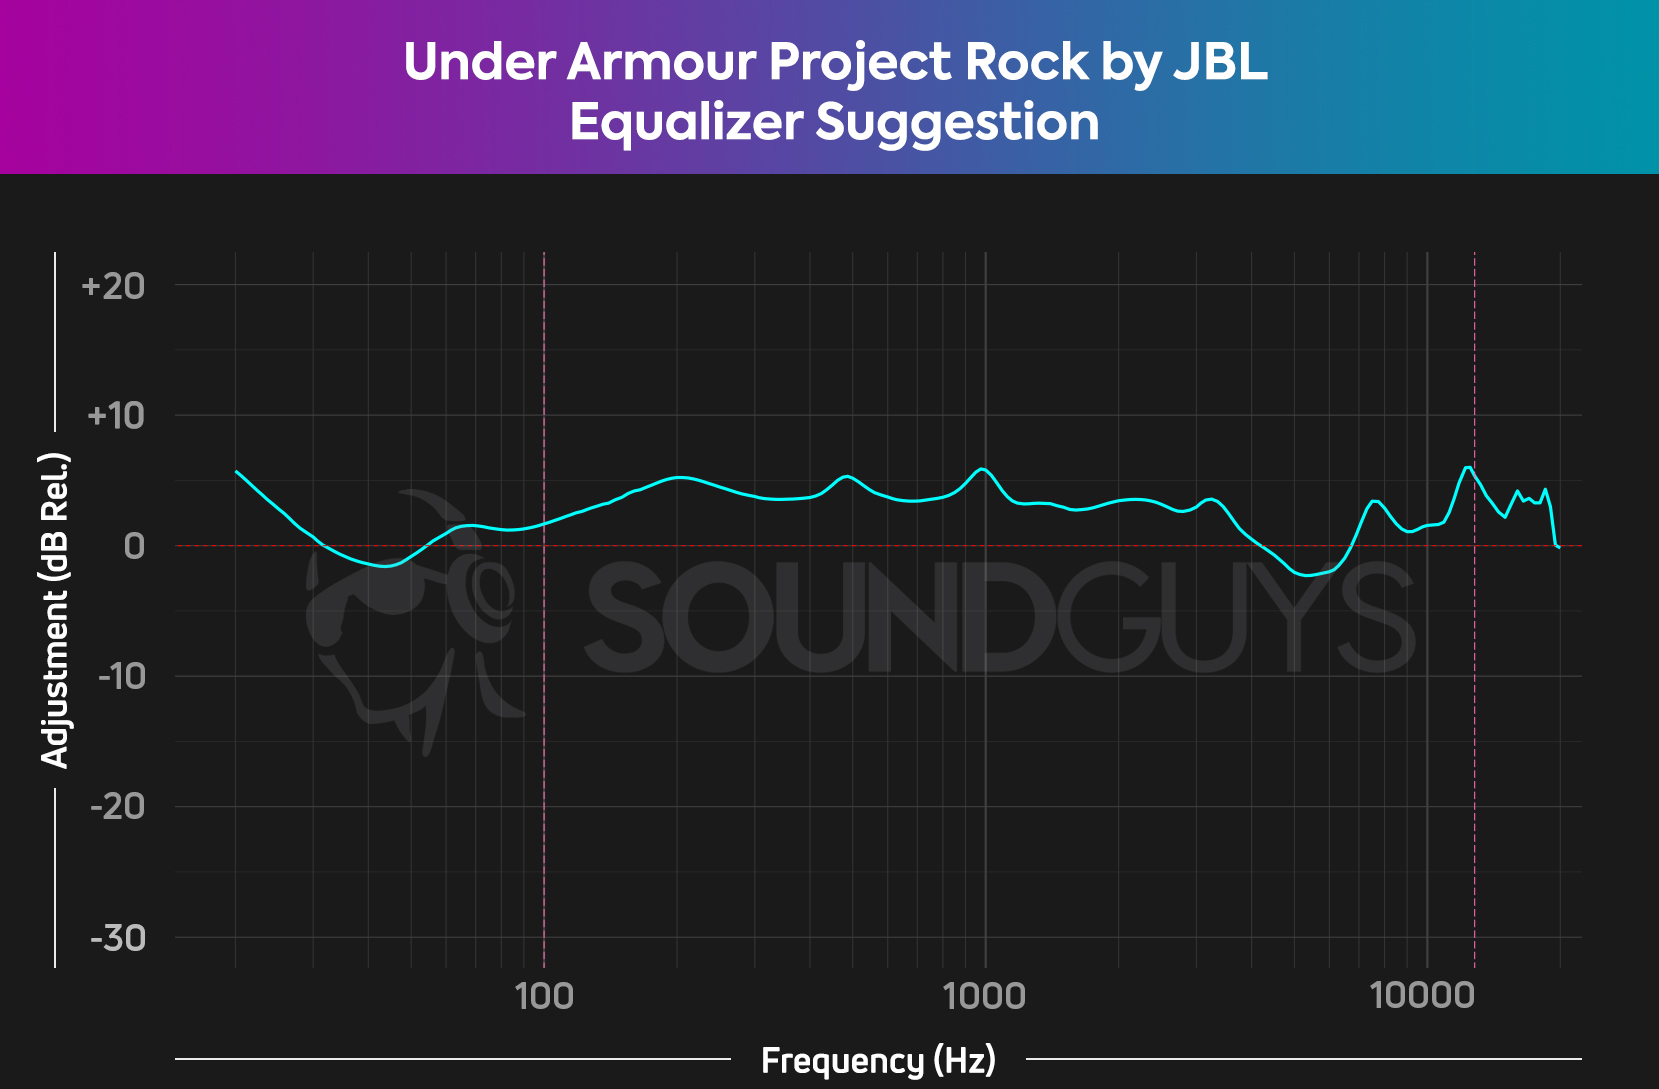 Shown is a suggested EQ to produce a closer approximation of the SoundGuys ideal frequency response.